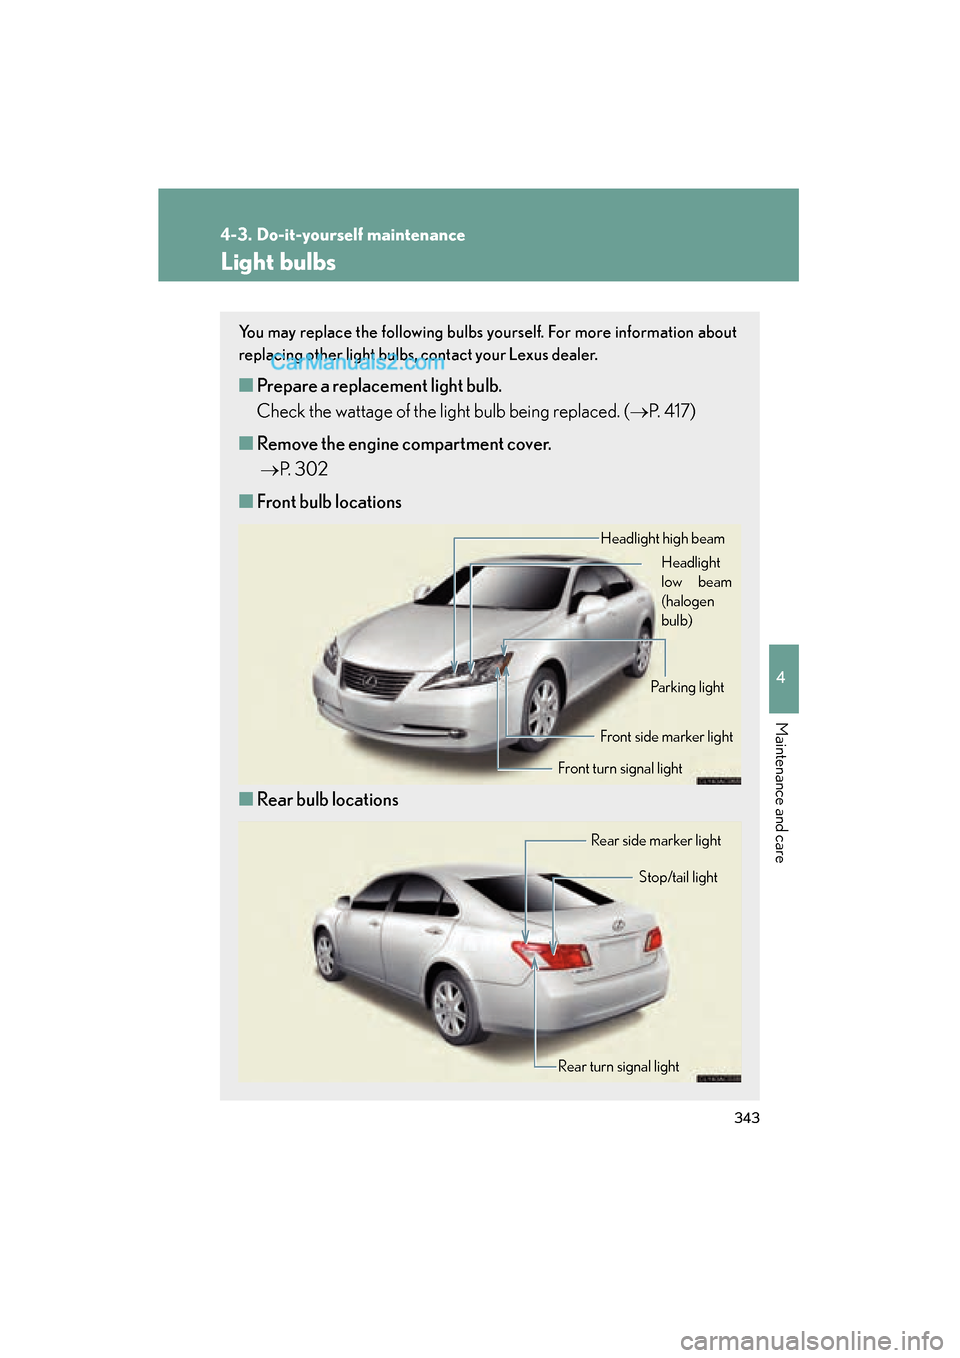 Lexus ES350 2008  Owners Manual 343
4-3. Do-it-yourself maintenance
4
Maintenance and care
ES350_U_(L/O_0708)
Light bulbs
You may replace the following bulbs yourself. For more information about
replacing other light bulbs, contact 